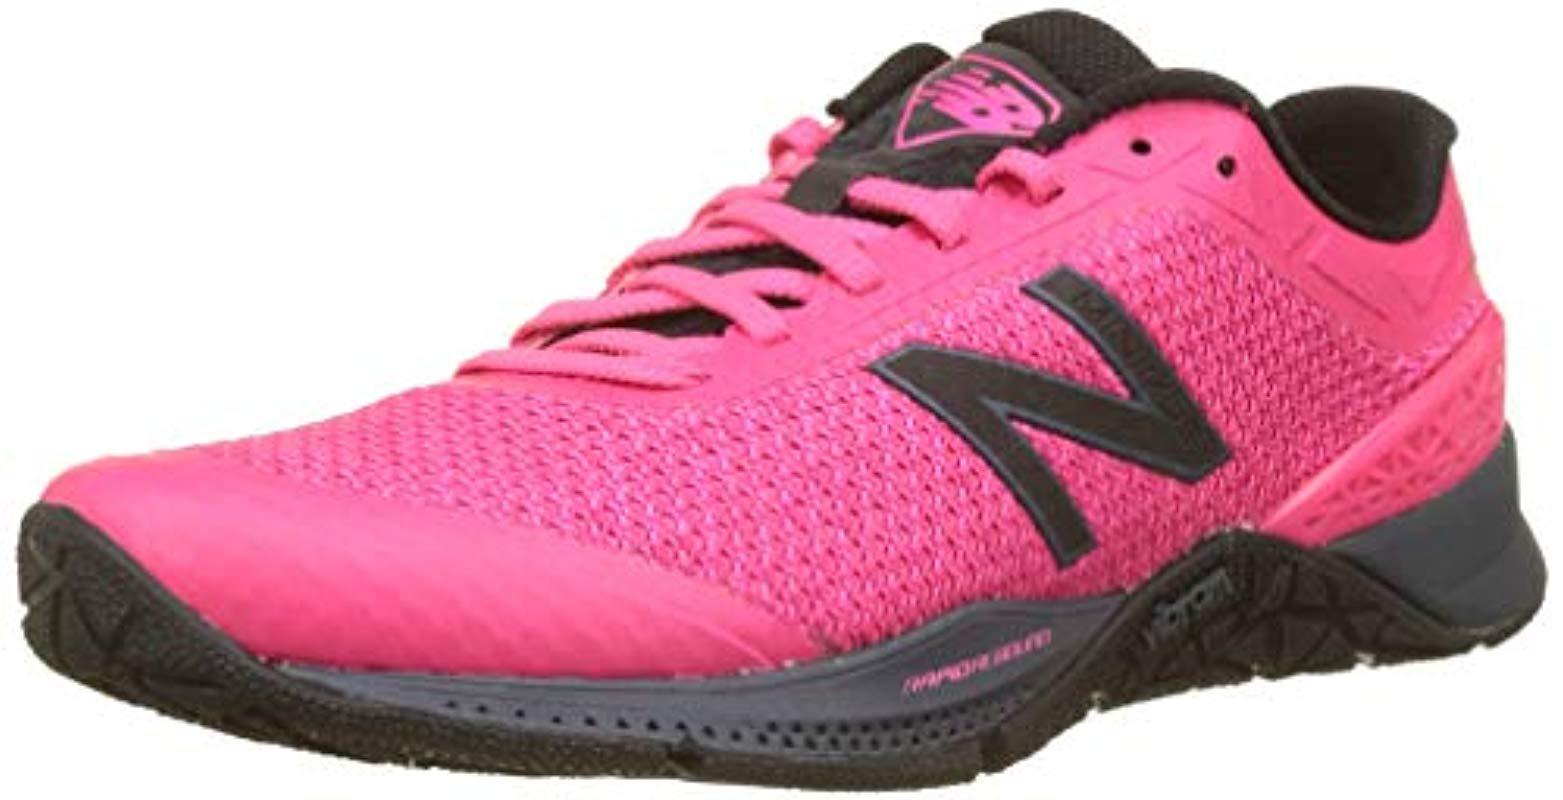 New Balance Minimus 40 Cross Trainers in Violet (Magenta) (Blue) - Save 70%  - Lyst